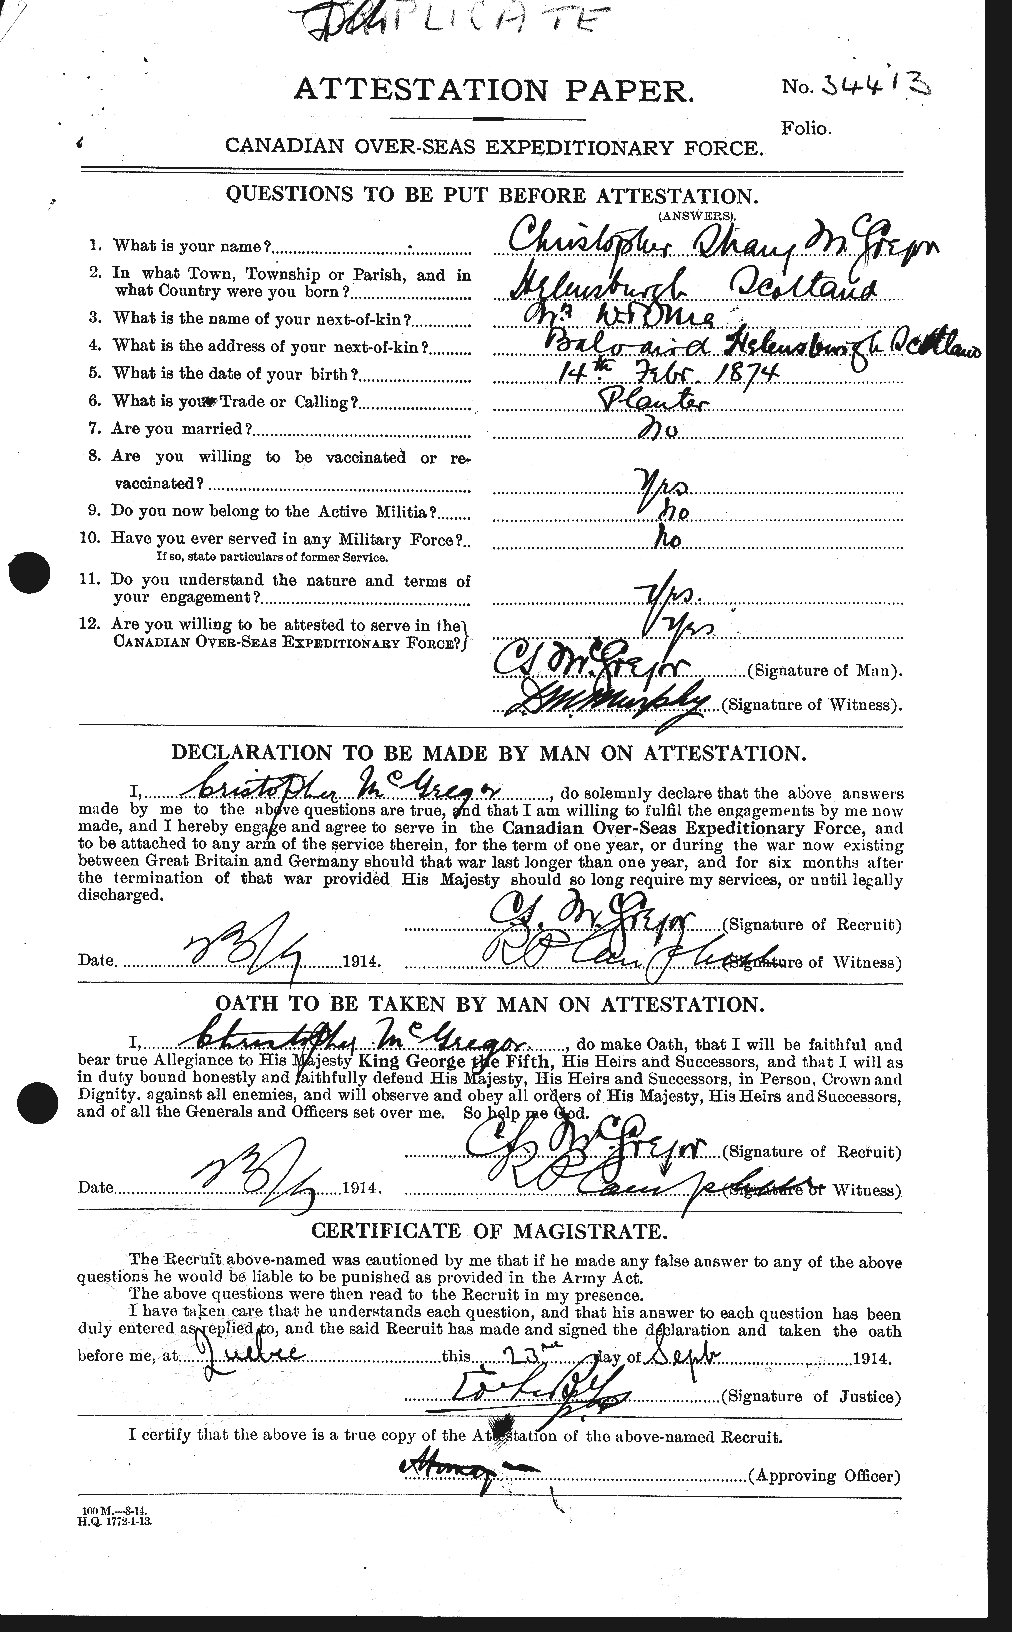 Personnel Records of the First World War - CEF 523874a